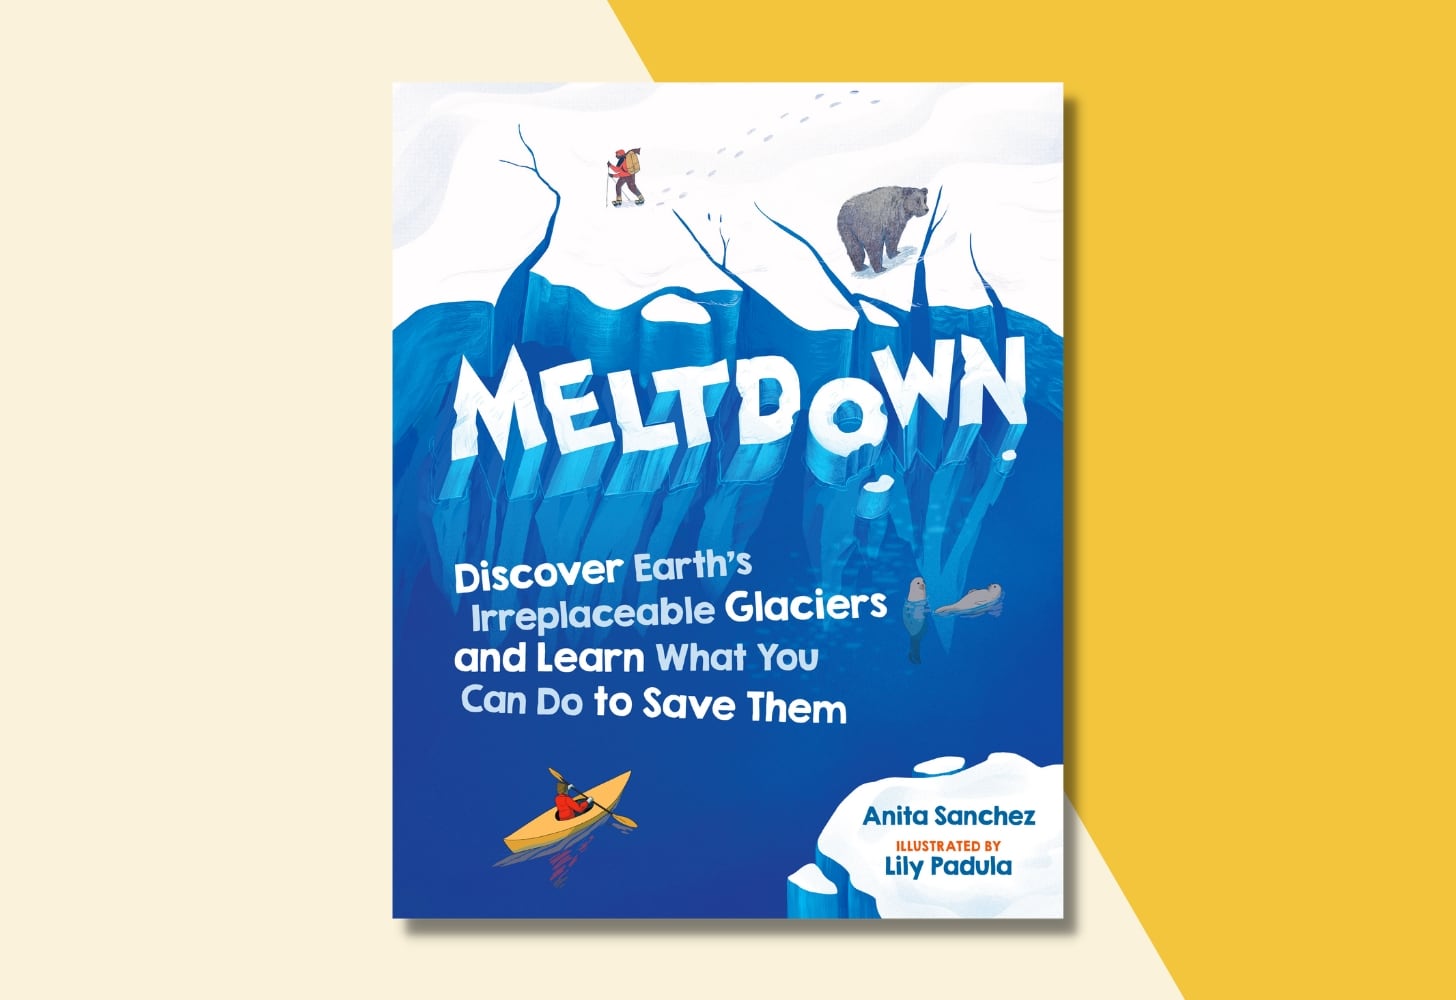 “Meltdown: Discover Earth’s Irreplaceable Glaciers and Learn What You Can Do to Save Them” by Anita Sanchez